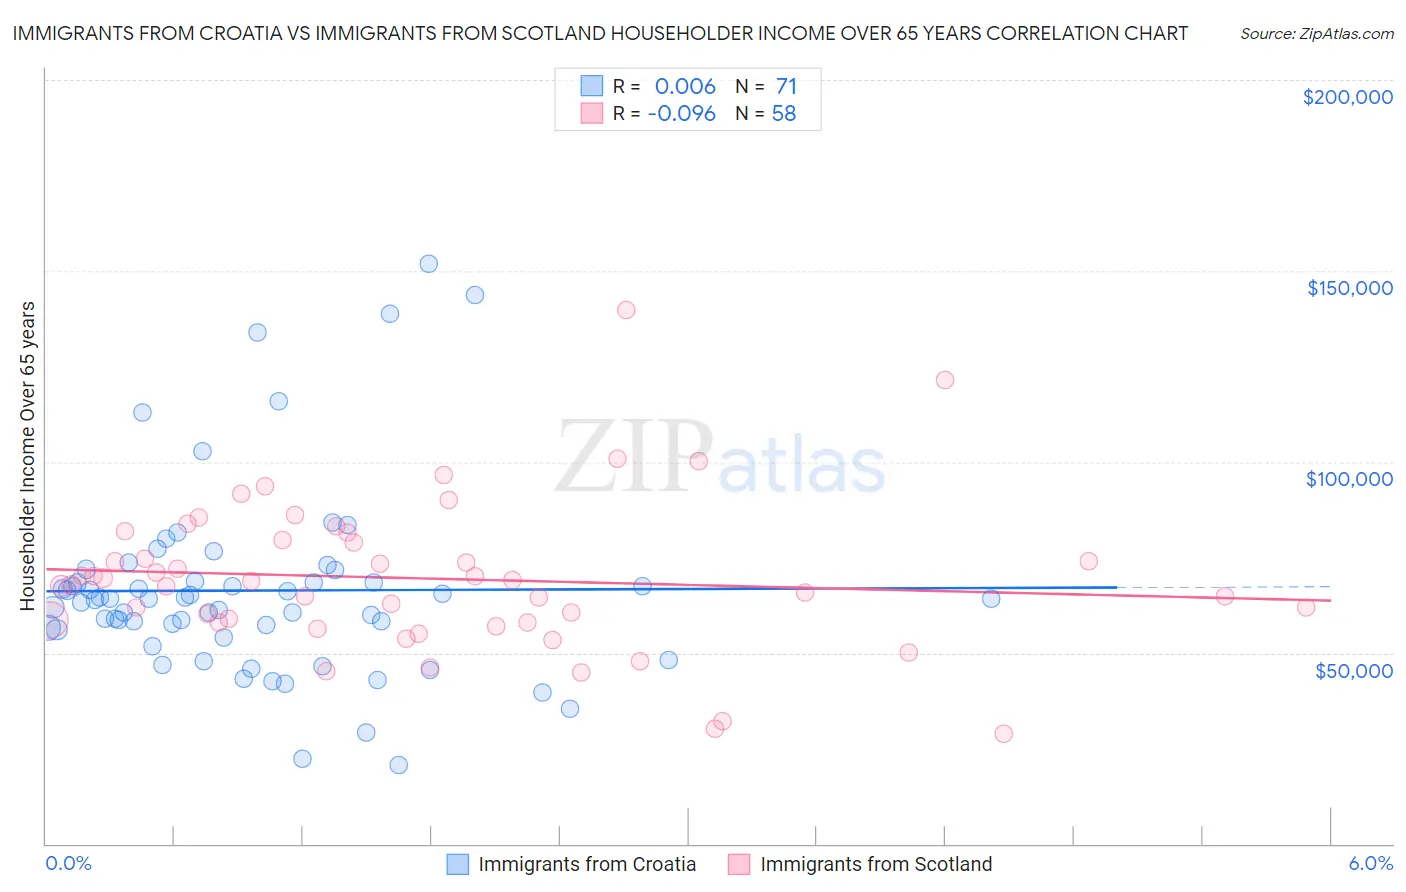 Immigrants from Croatia vs Immigrants from Scotland Householder Income Over 65 years